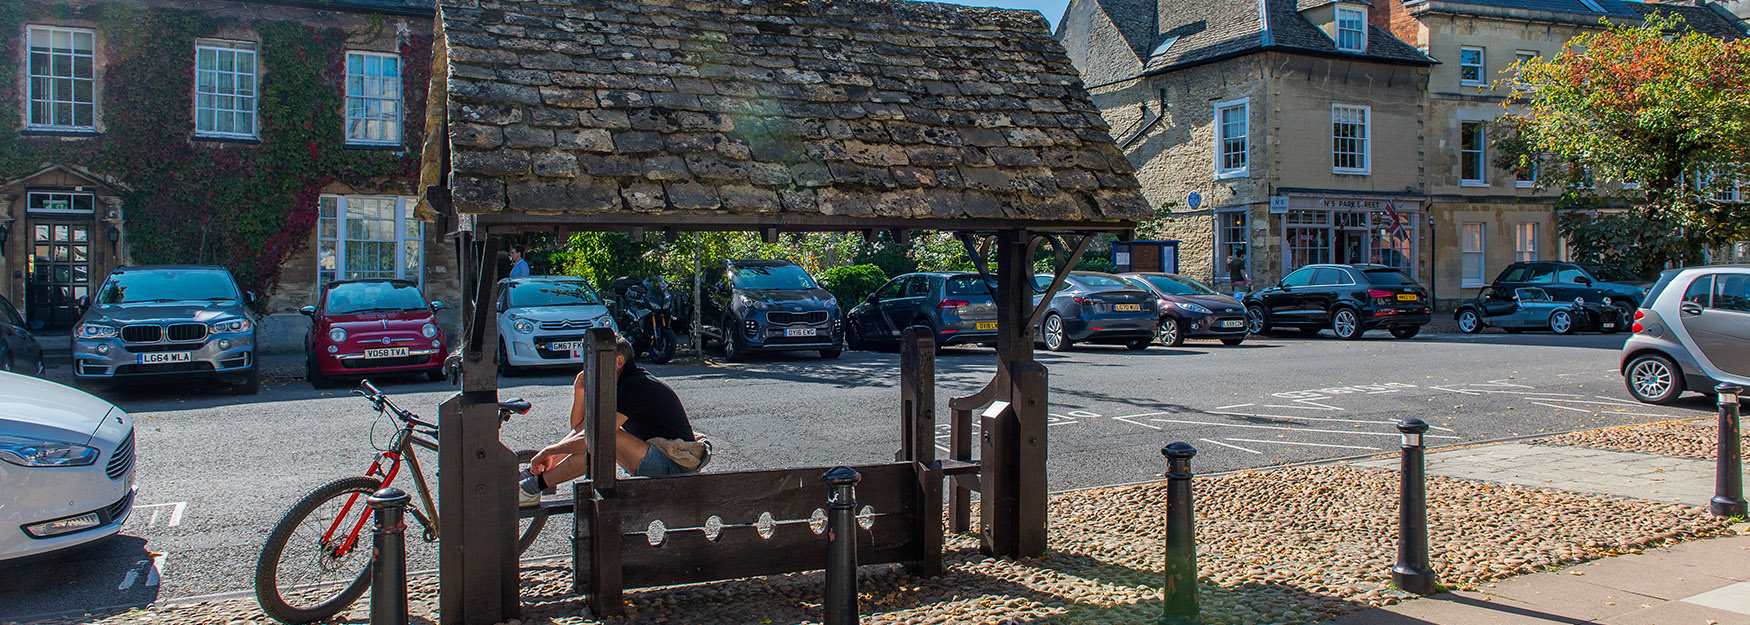 The ancient stocks in the centre of historic Woodstock (photo by Jay Alice Photographic)